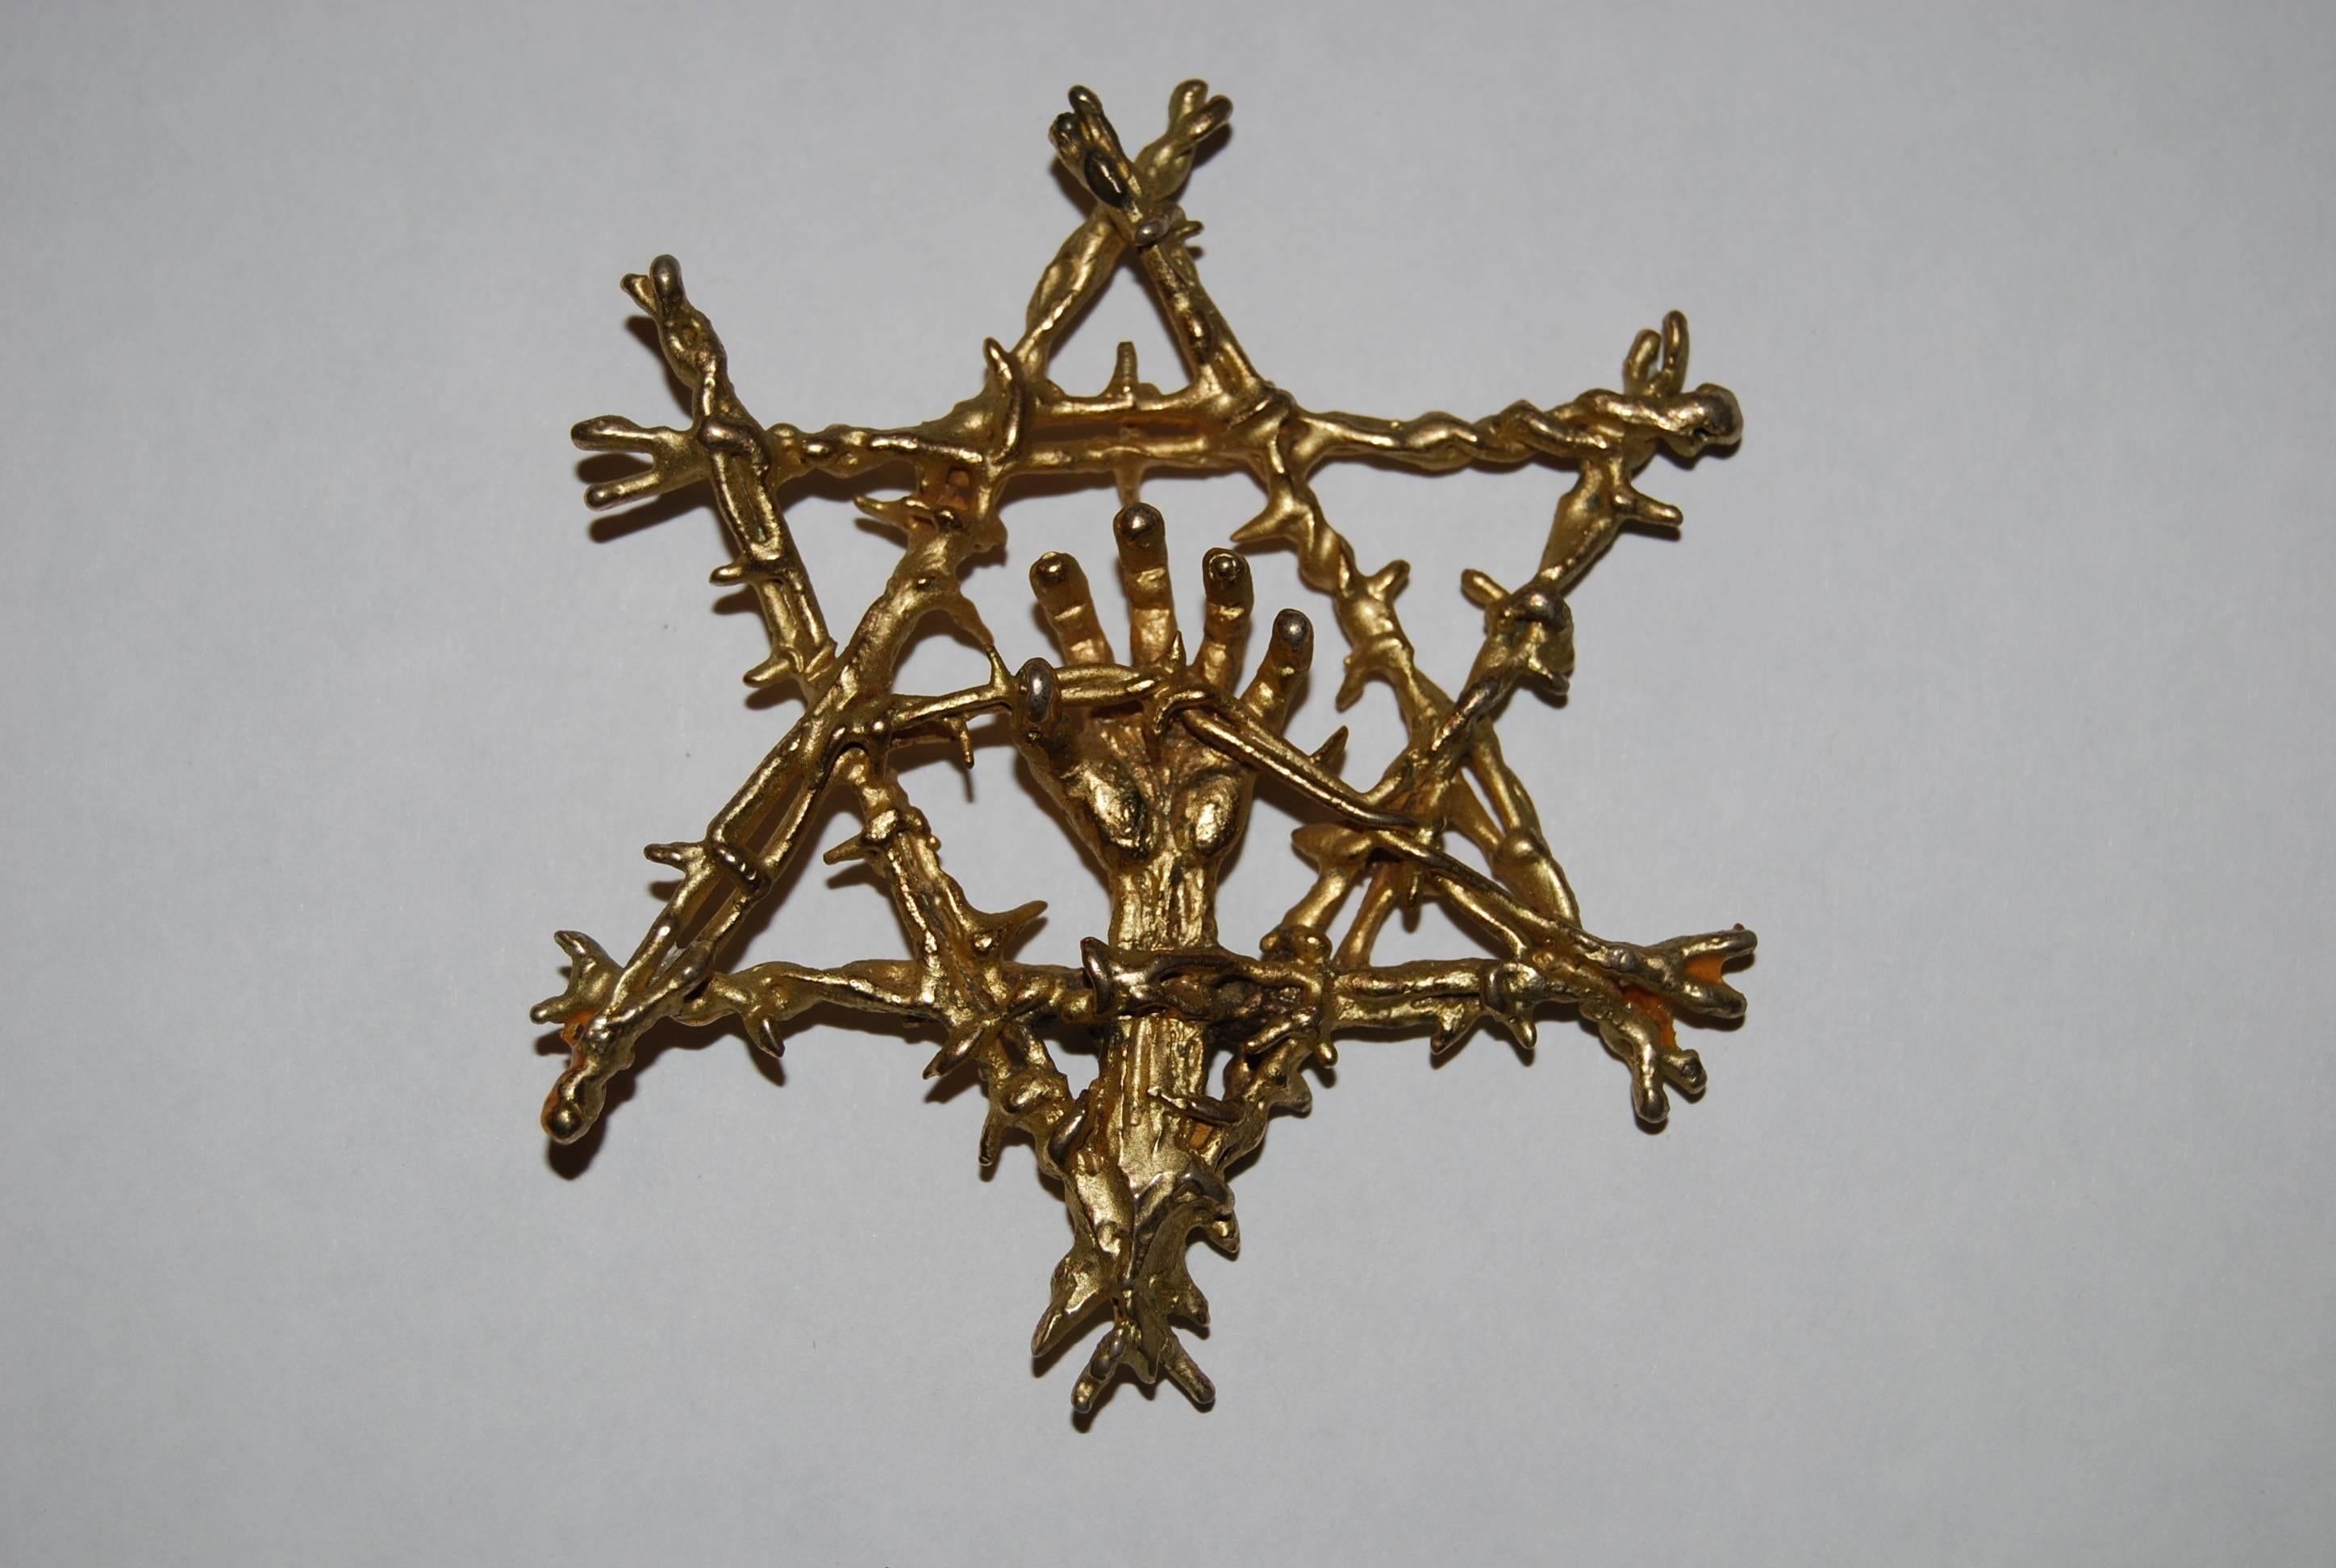 The Holocaust Star was commissioned by Michael Landon to give to directors, producers and other Hollywood peers. Made from jeweler's bronze and heavily gold plated. This is one of two from Sascha's estate the other one is in The Museum of Tolerance,